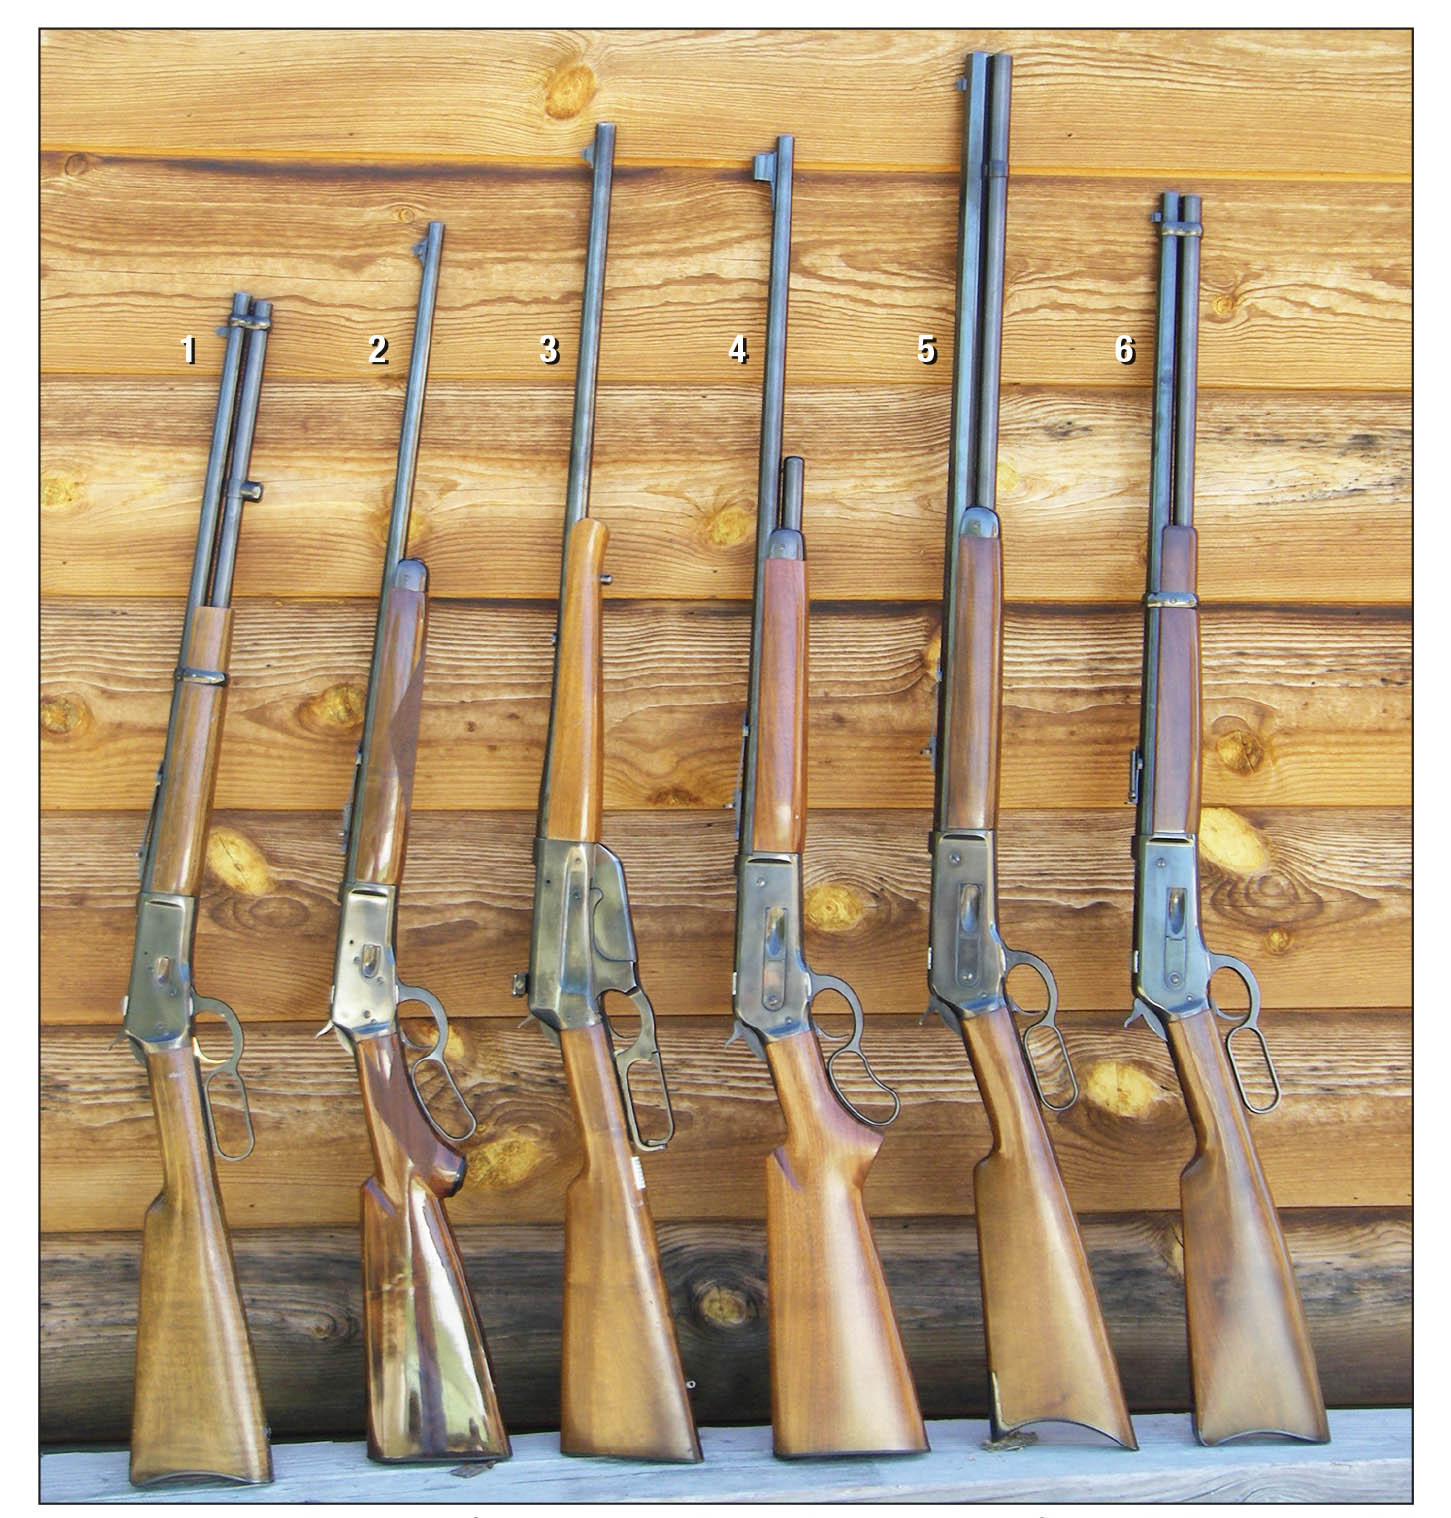 Browning reproductions of vintage Winchester lever-action rifles include a (1) Model B-92 .357 Magnum, (2) Model 53 .32-20 Winchester, (3) Model 1895 .30-40 Krag, (4) Model 71 .348 Winchester, (5) Model 1886 .45-70 rifle and a (6) Model 1886 .45-70 carbine.